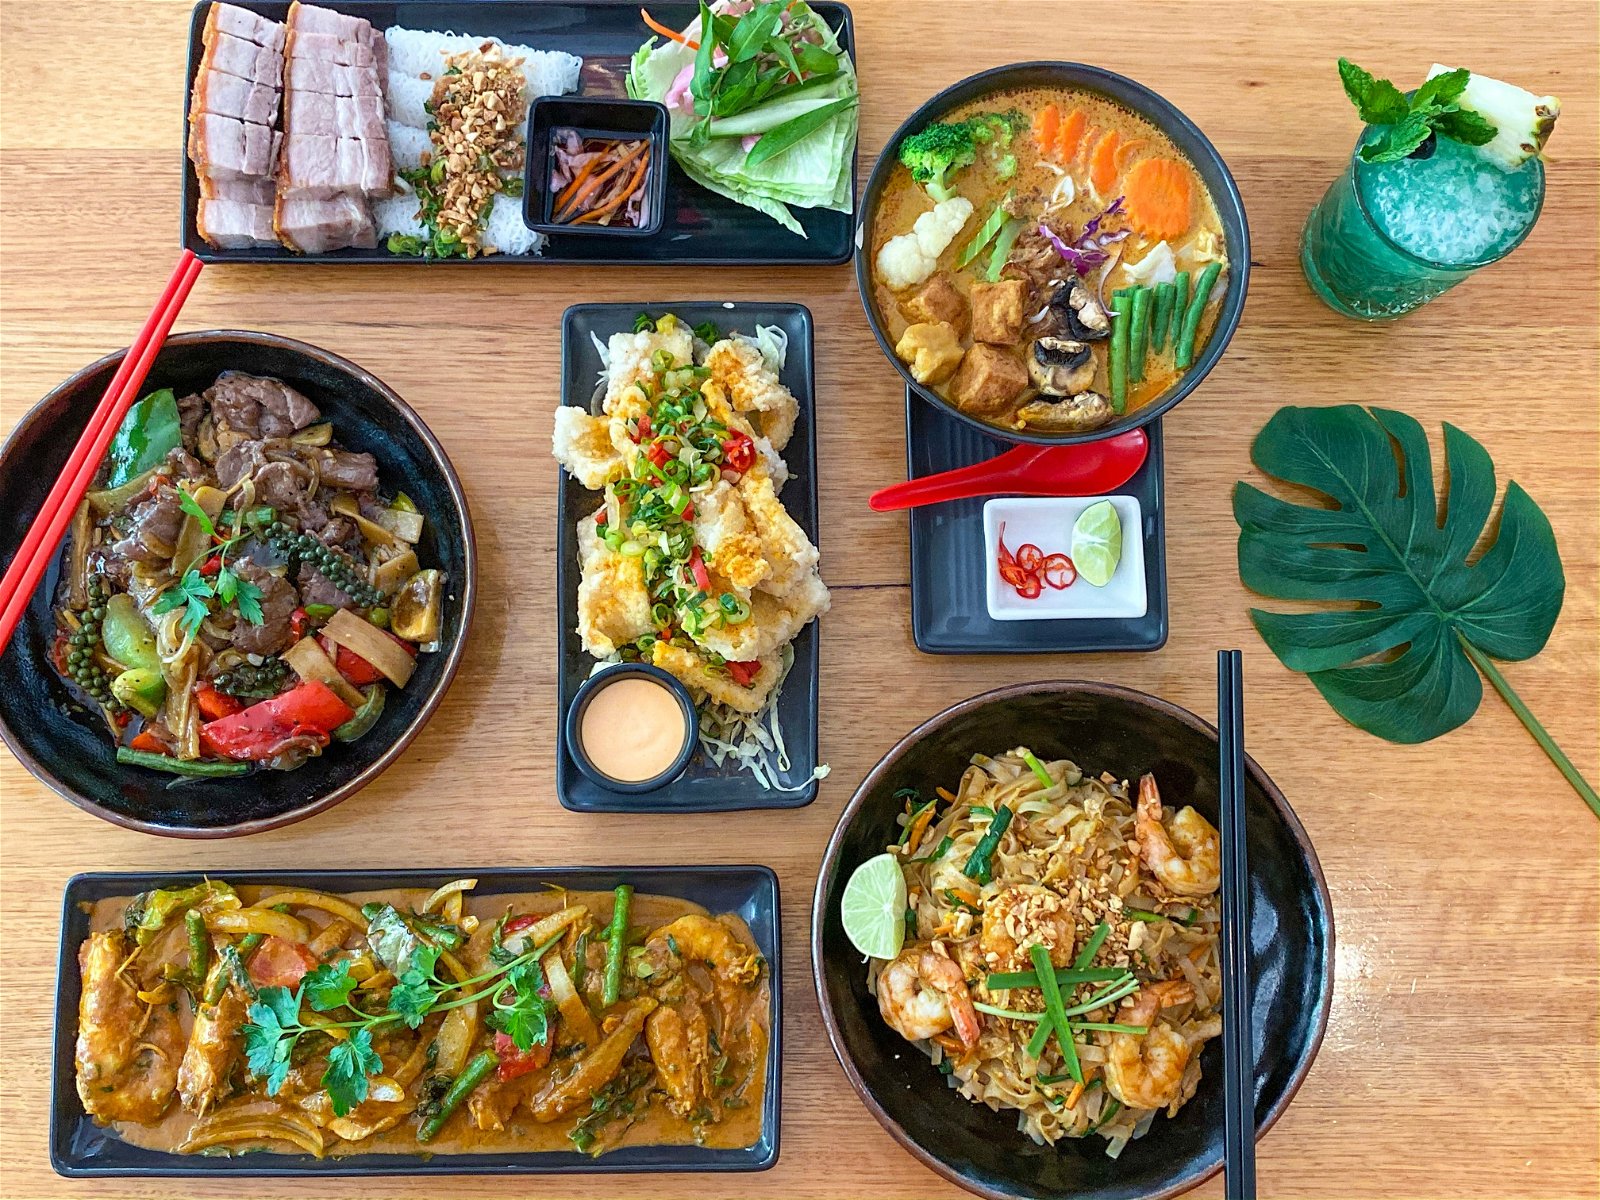 Chow A Taste of South East Asia - Pubs Sydney